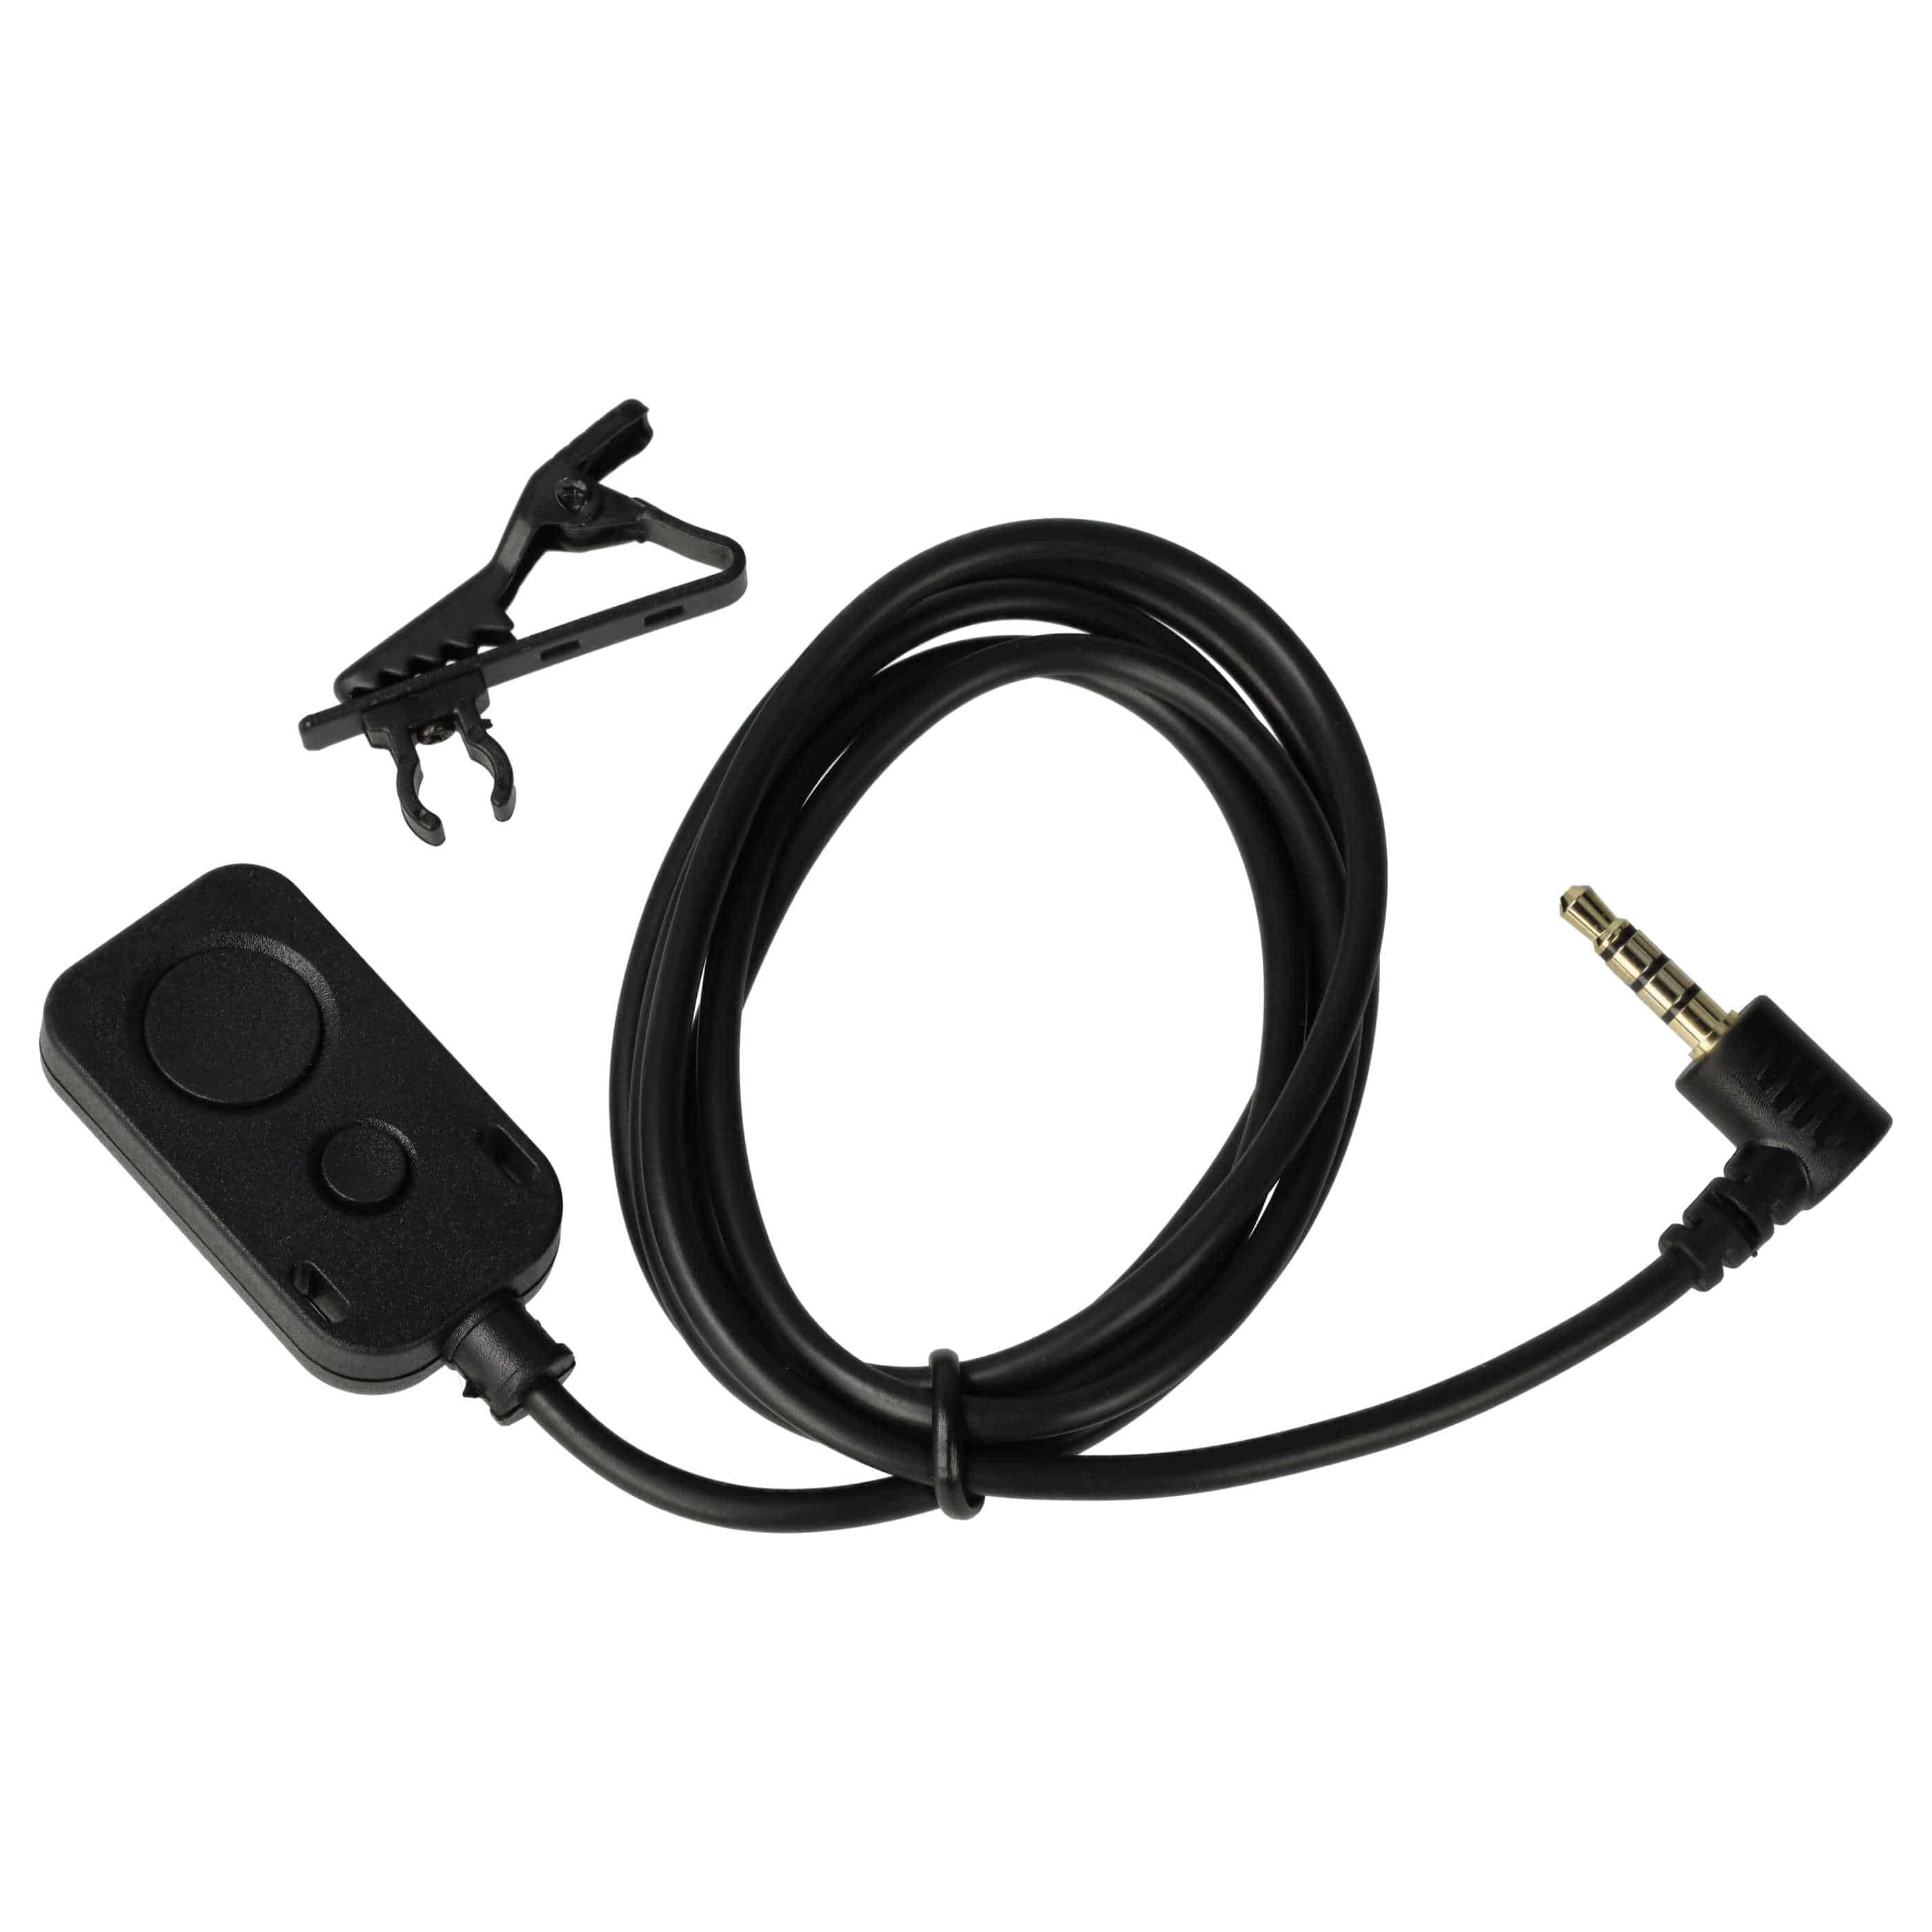 Remote Trigger as Exchange for Sigma CR-41 for Camera etc. 1 m Lead